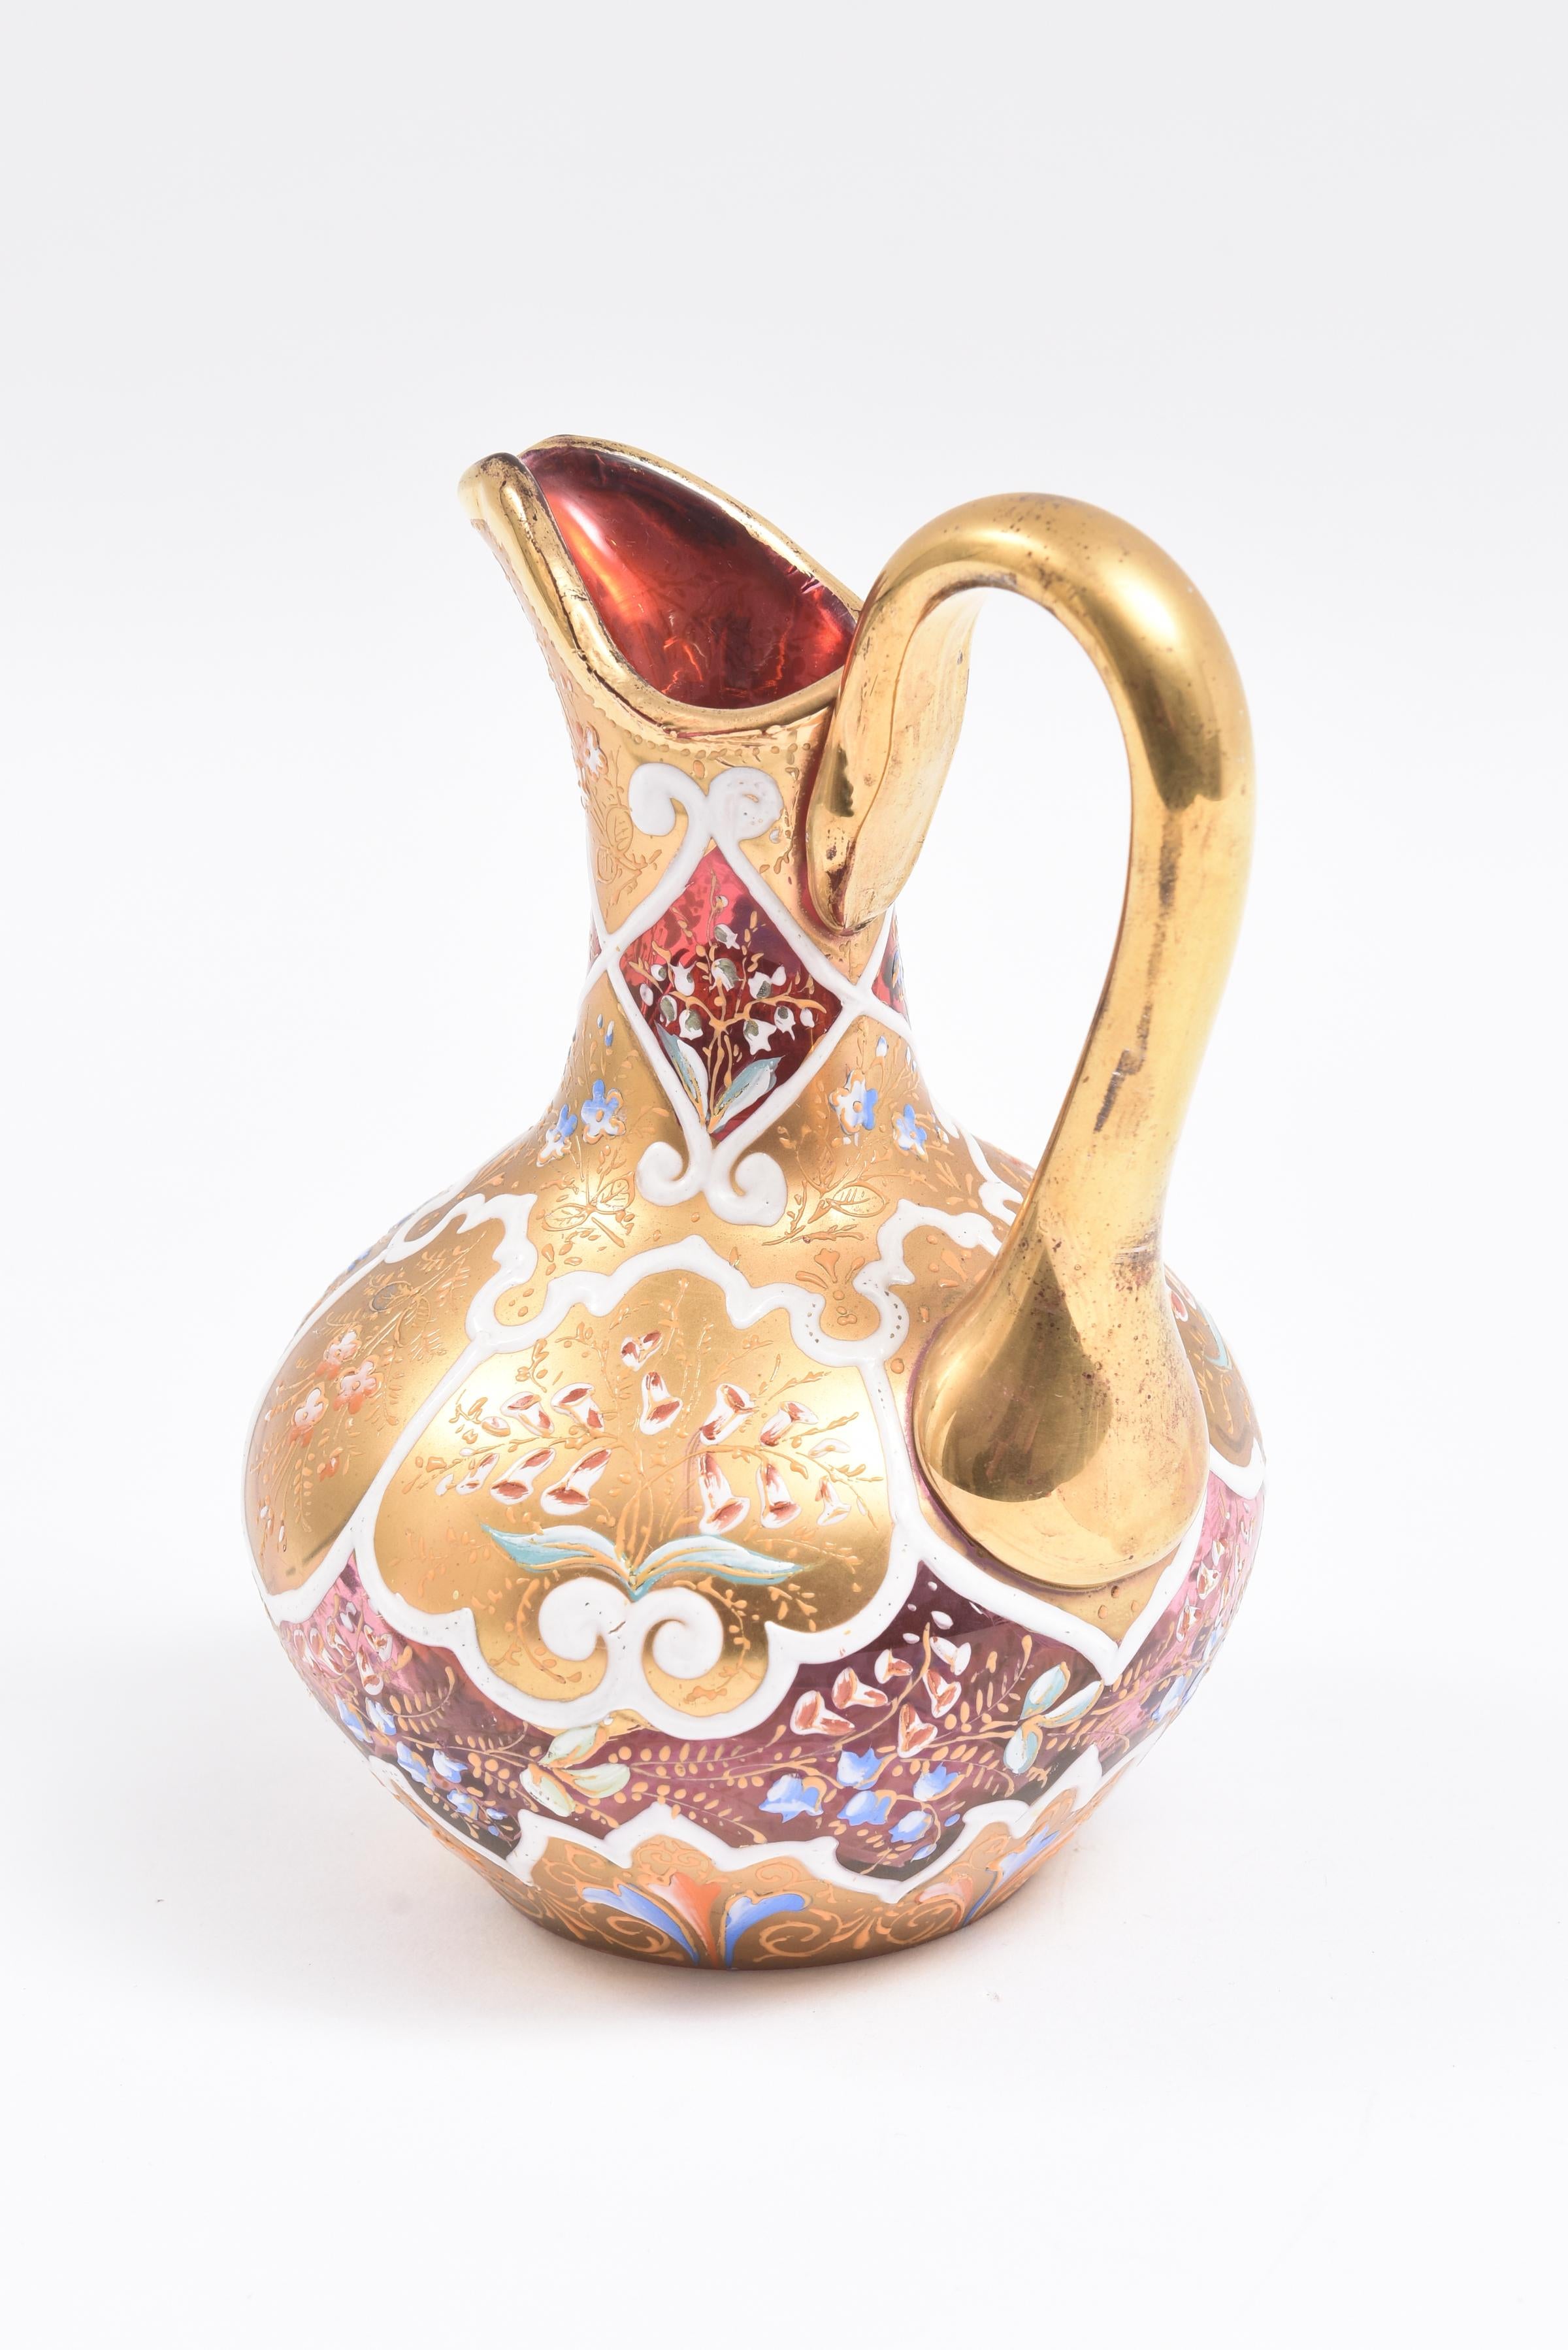 Czech Ornate Moser Glass Enamel and Gilt Pitcher or Ewer, 19th Century For Sale